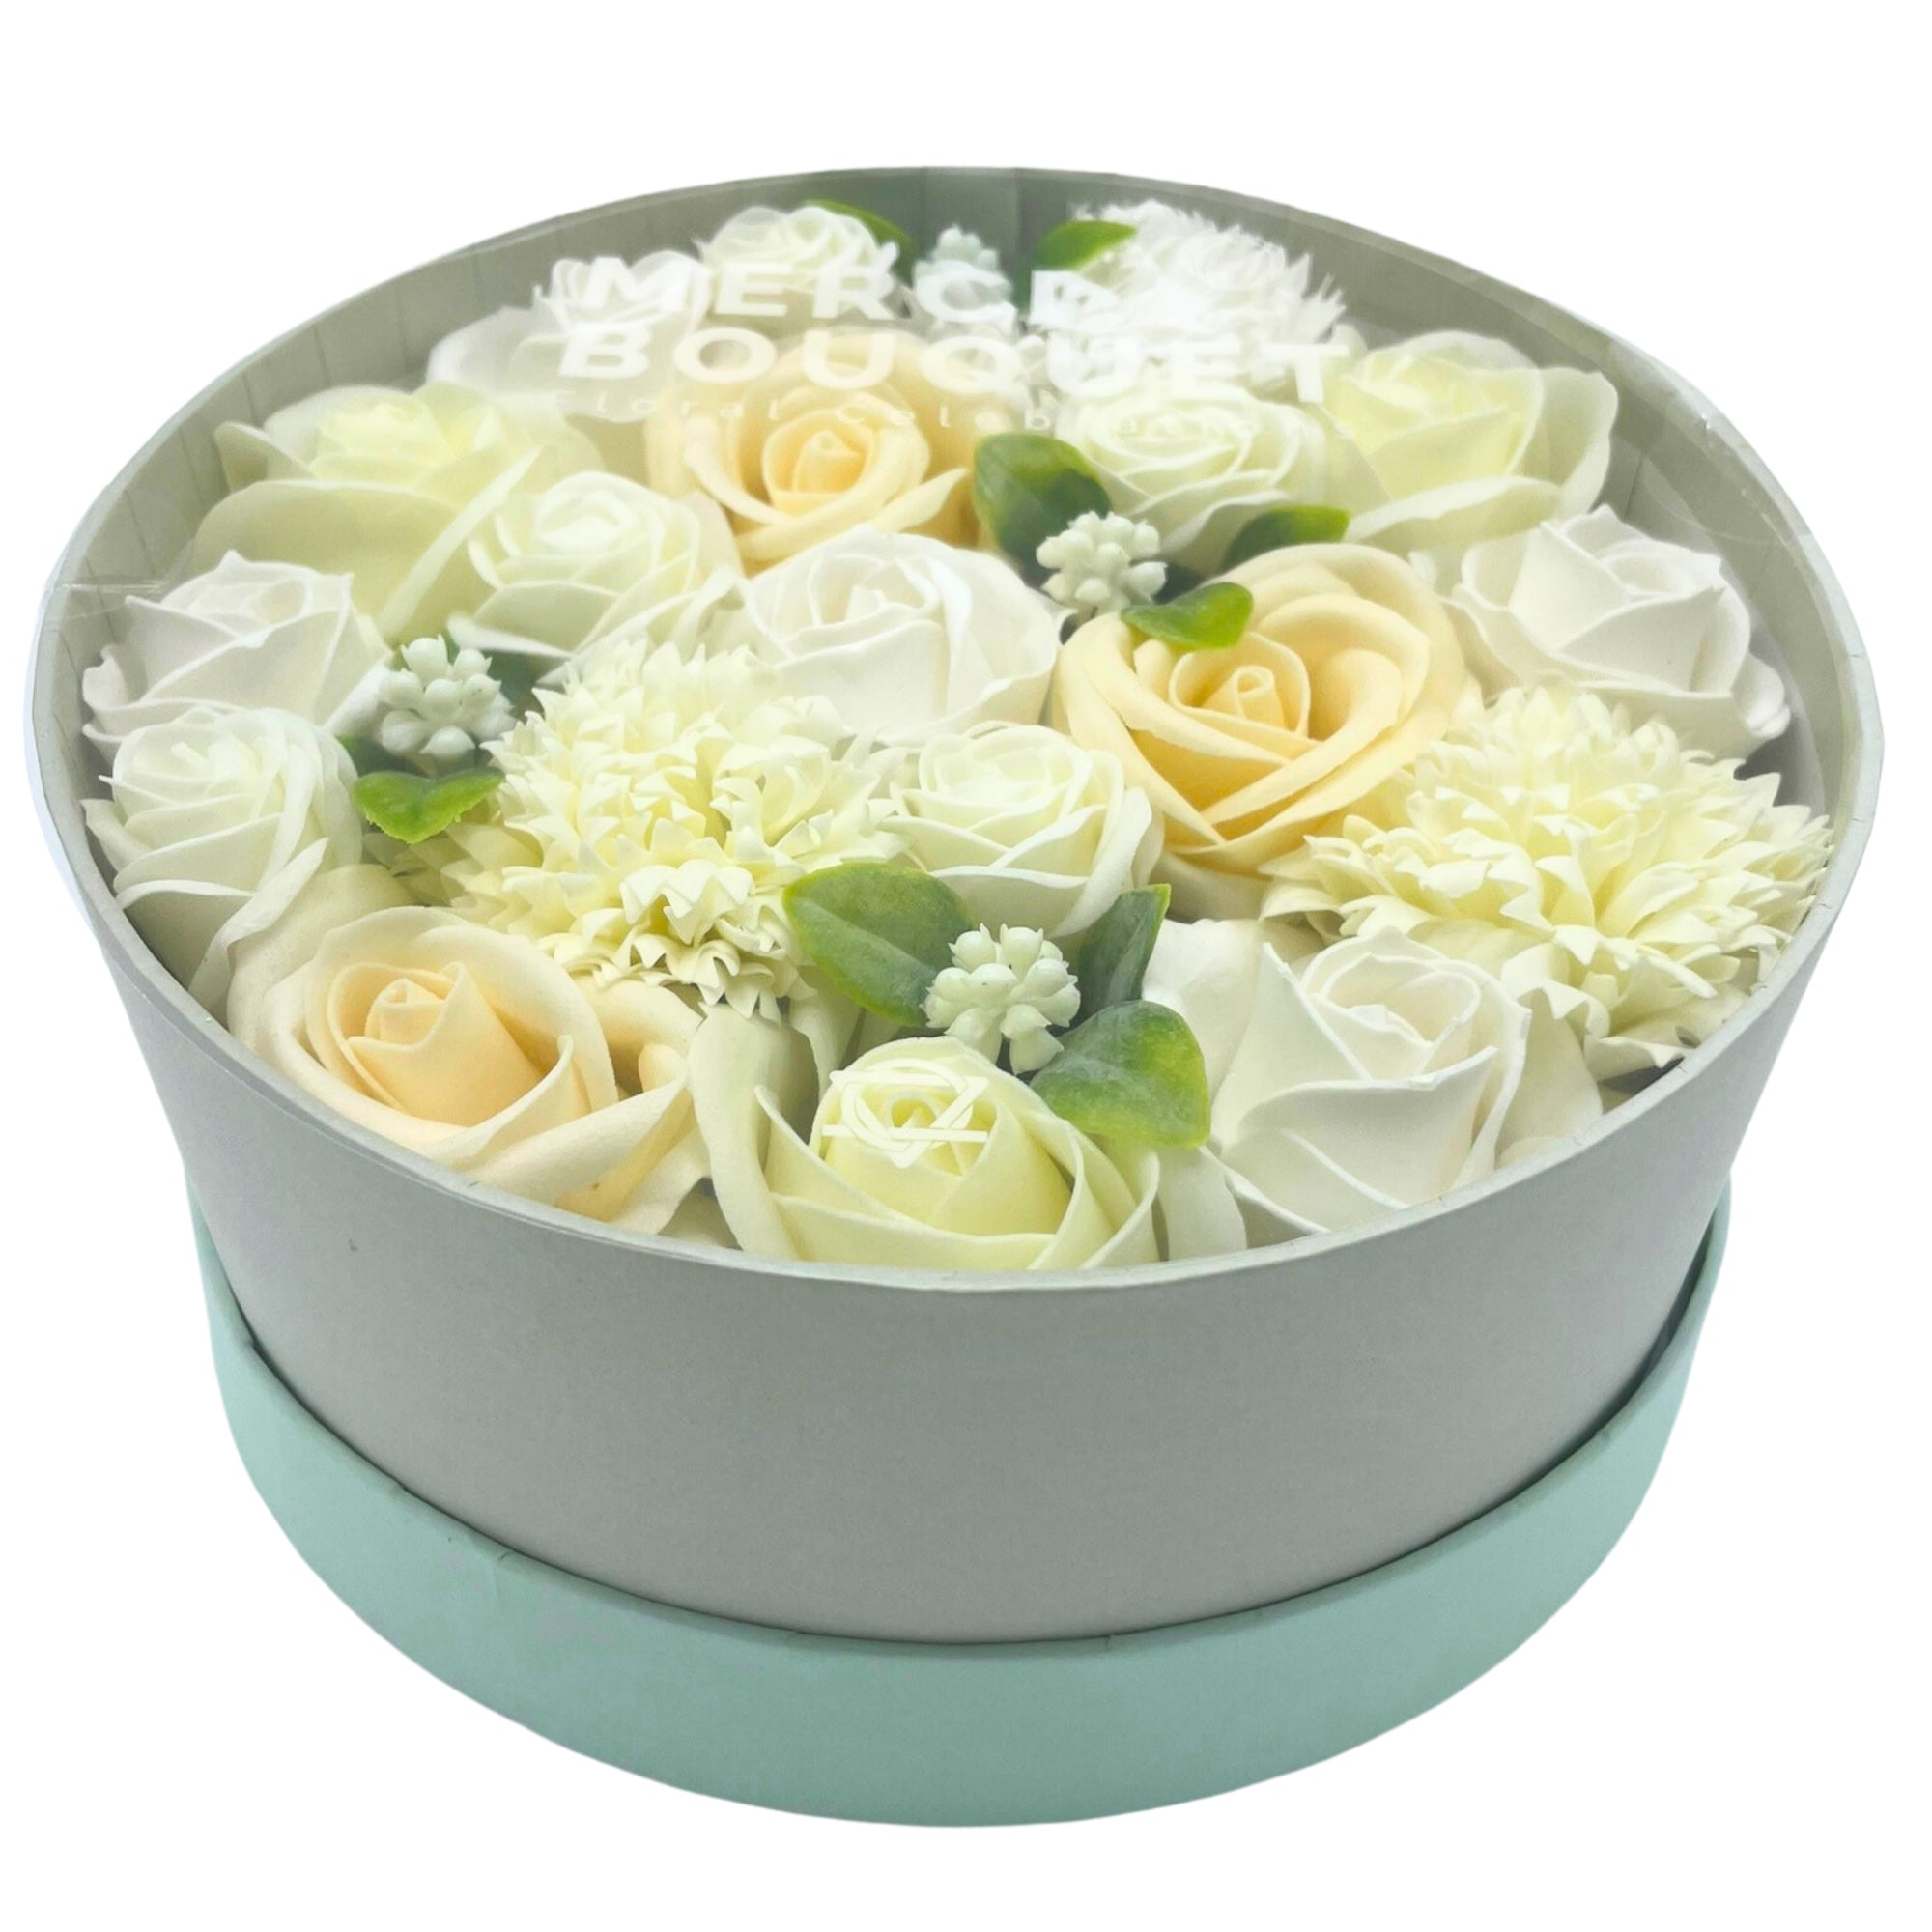 View Round Box Wedding Blessings White Ivory information